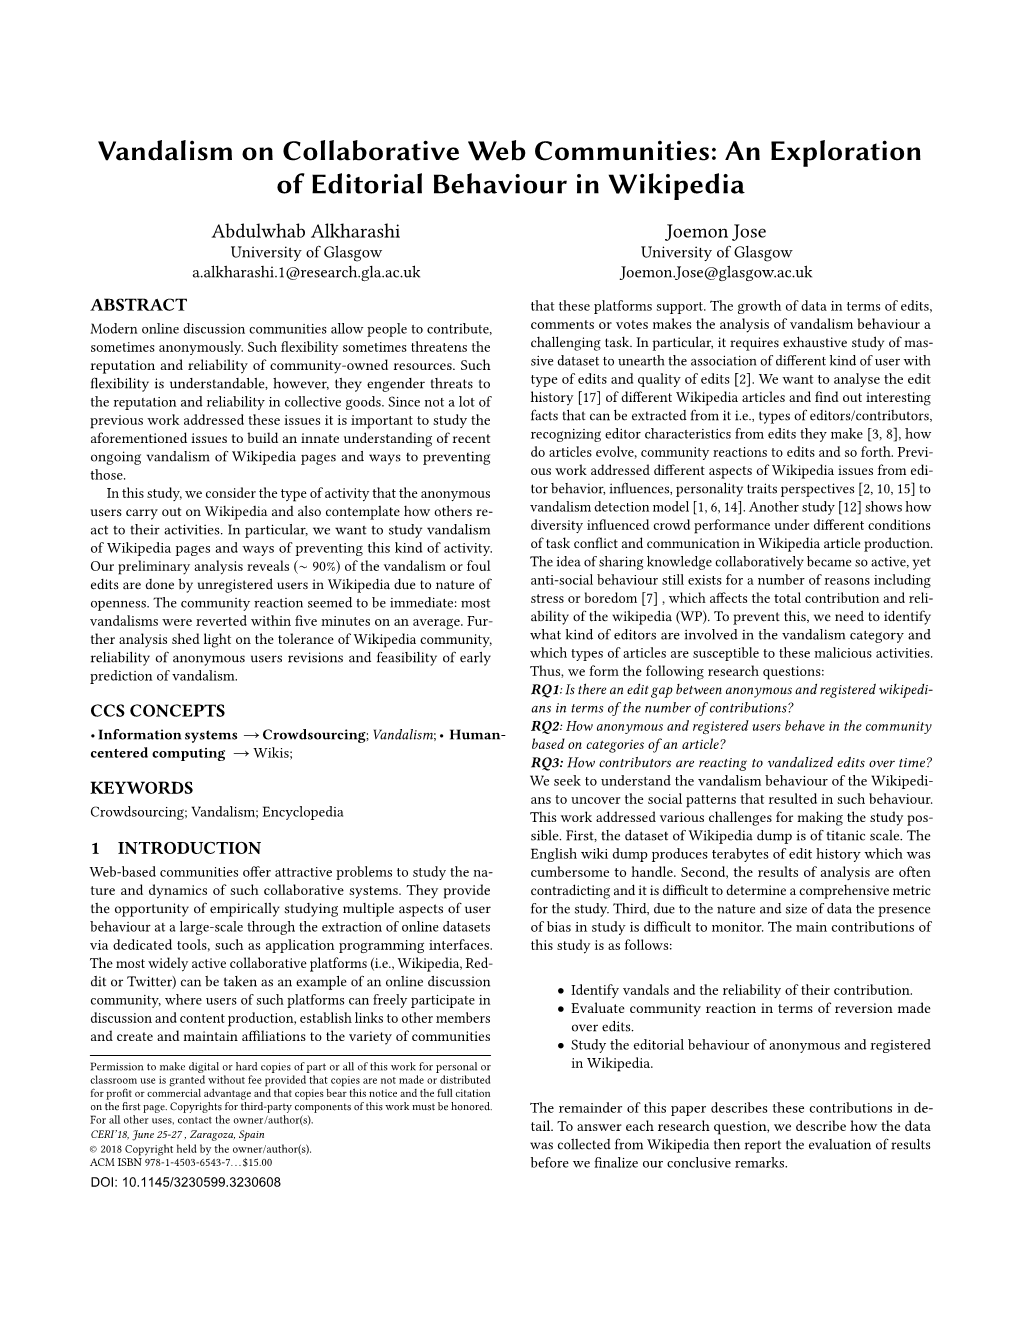 An Exploration of Editorial Behaviour in Wikipedia